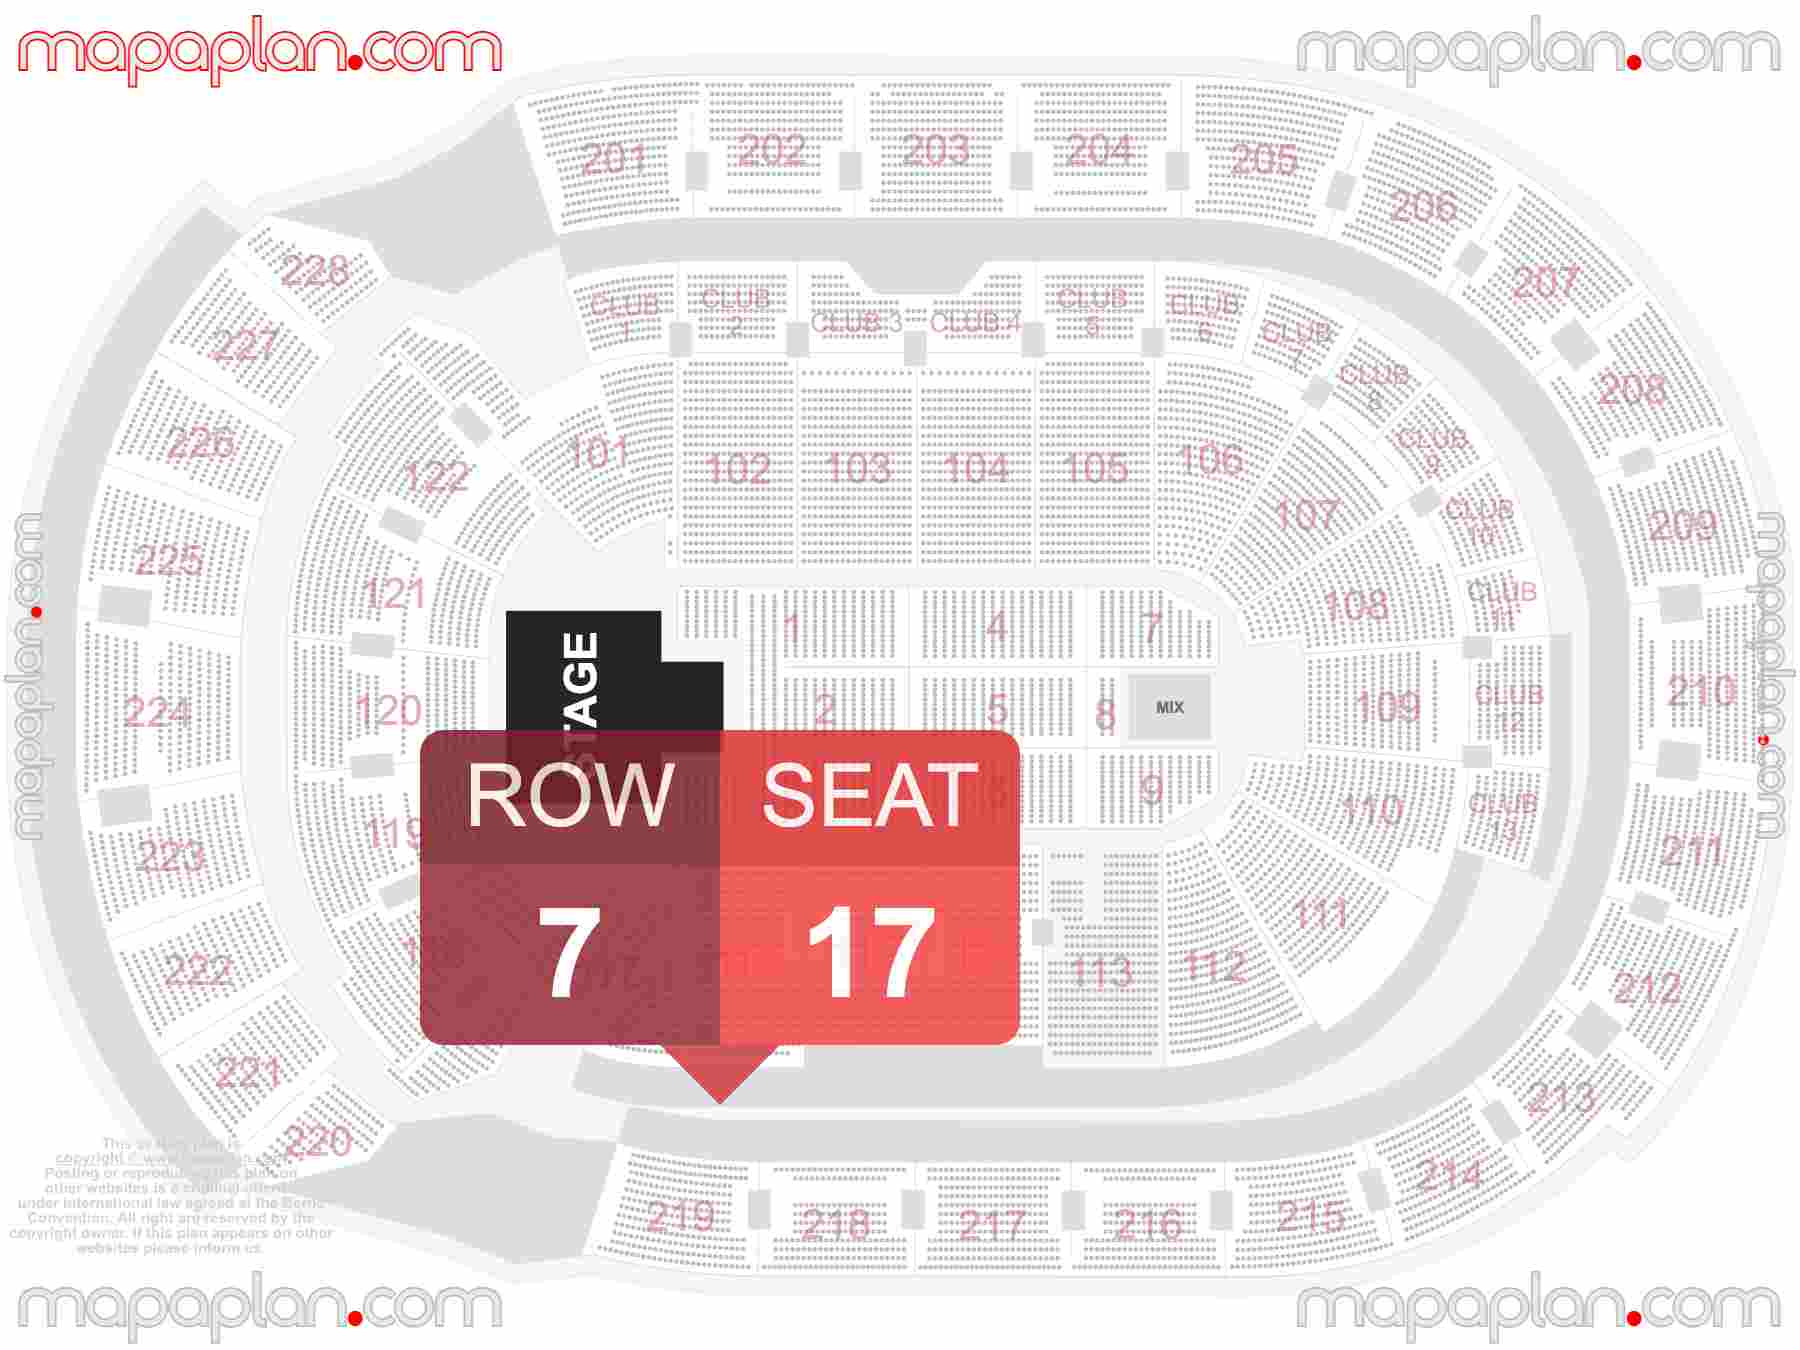 Columbus Nationwide Arena seating chart Concert with extended catwalk runway B-stage seating chart with exact section numbers showing best rows and seats selection 3d layout - Best interactive seat finder tool with precise detailed location data